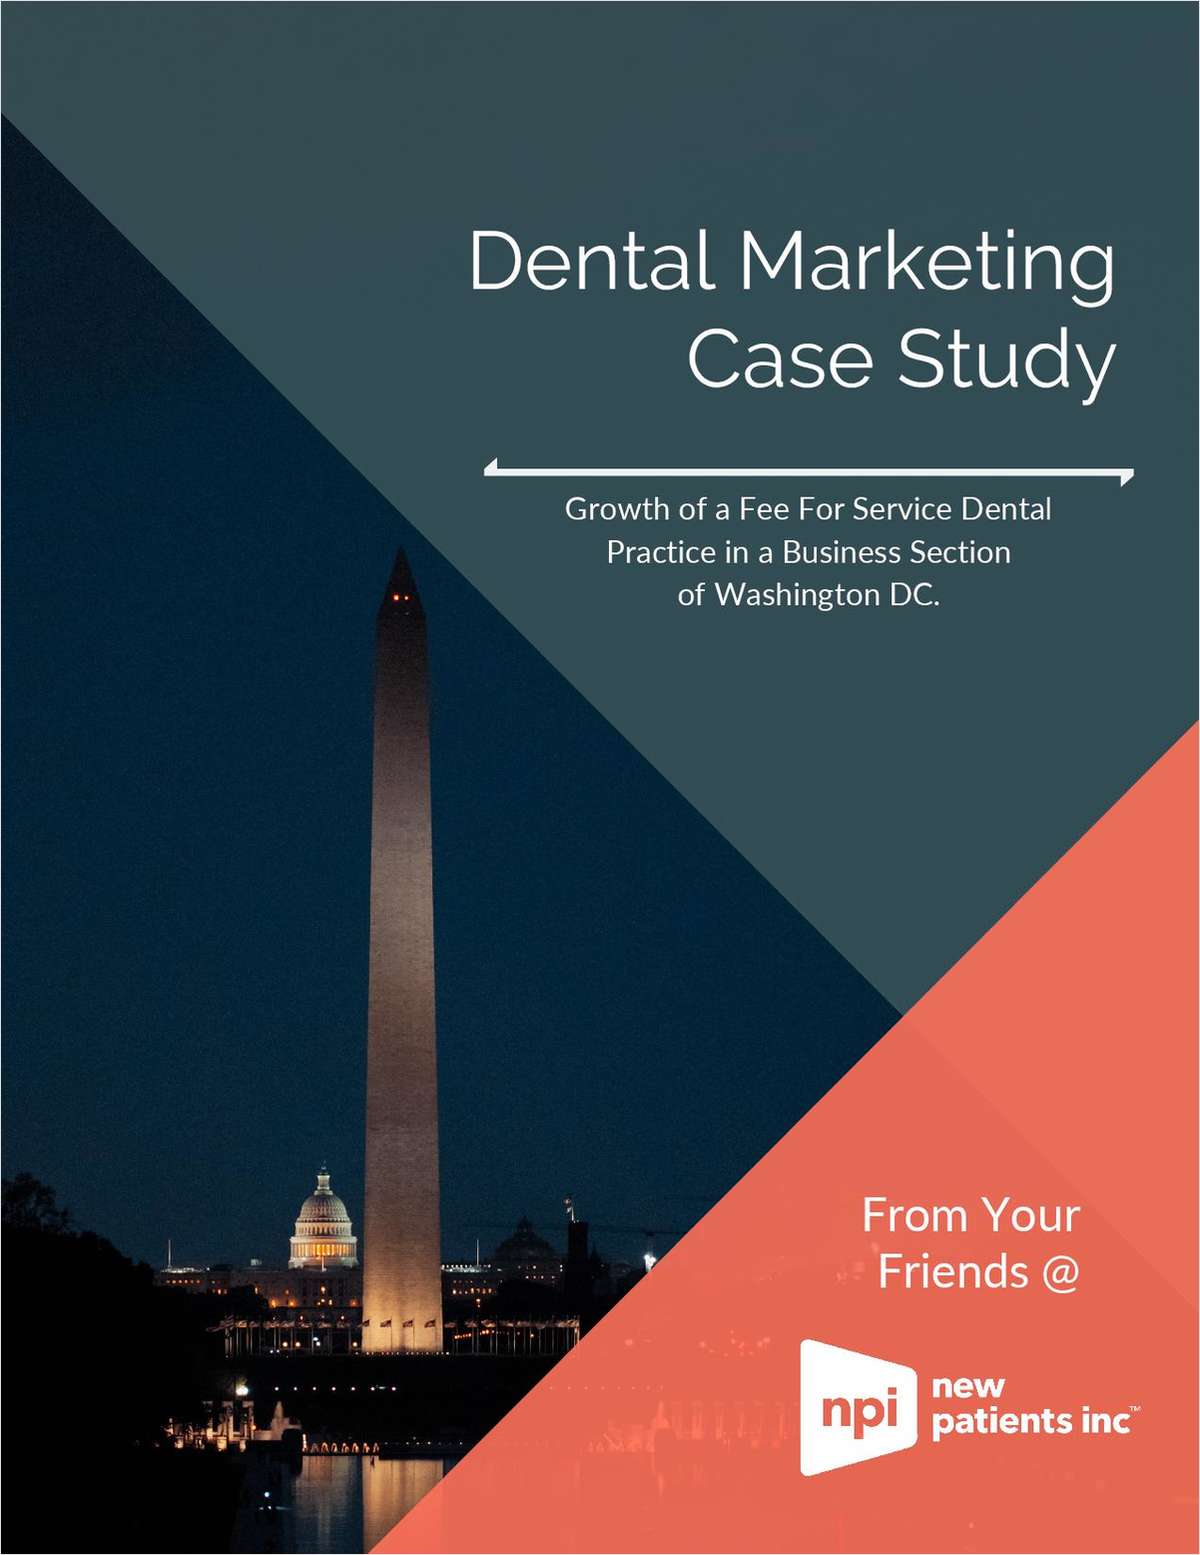 Growth of a fee for service dental practice in a business section of Washington DC.